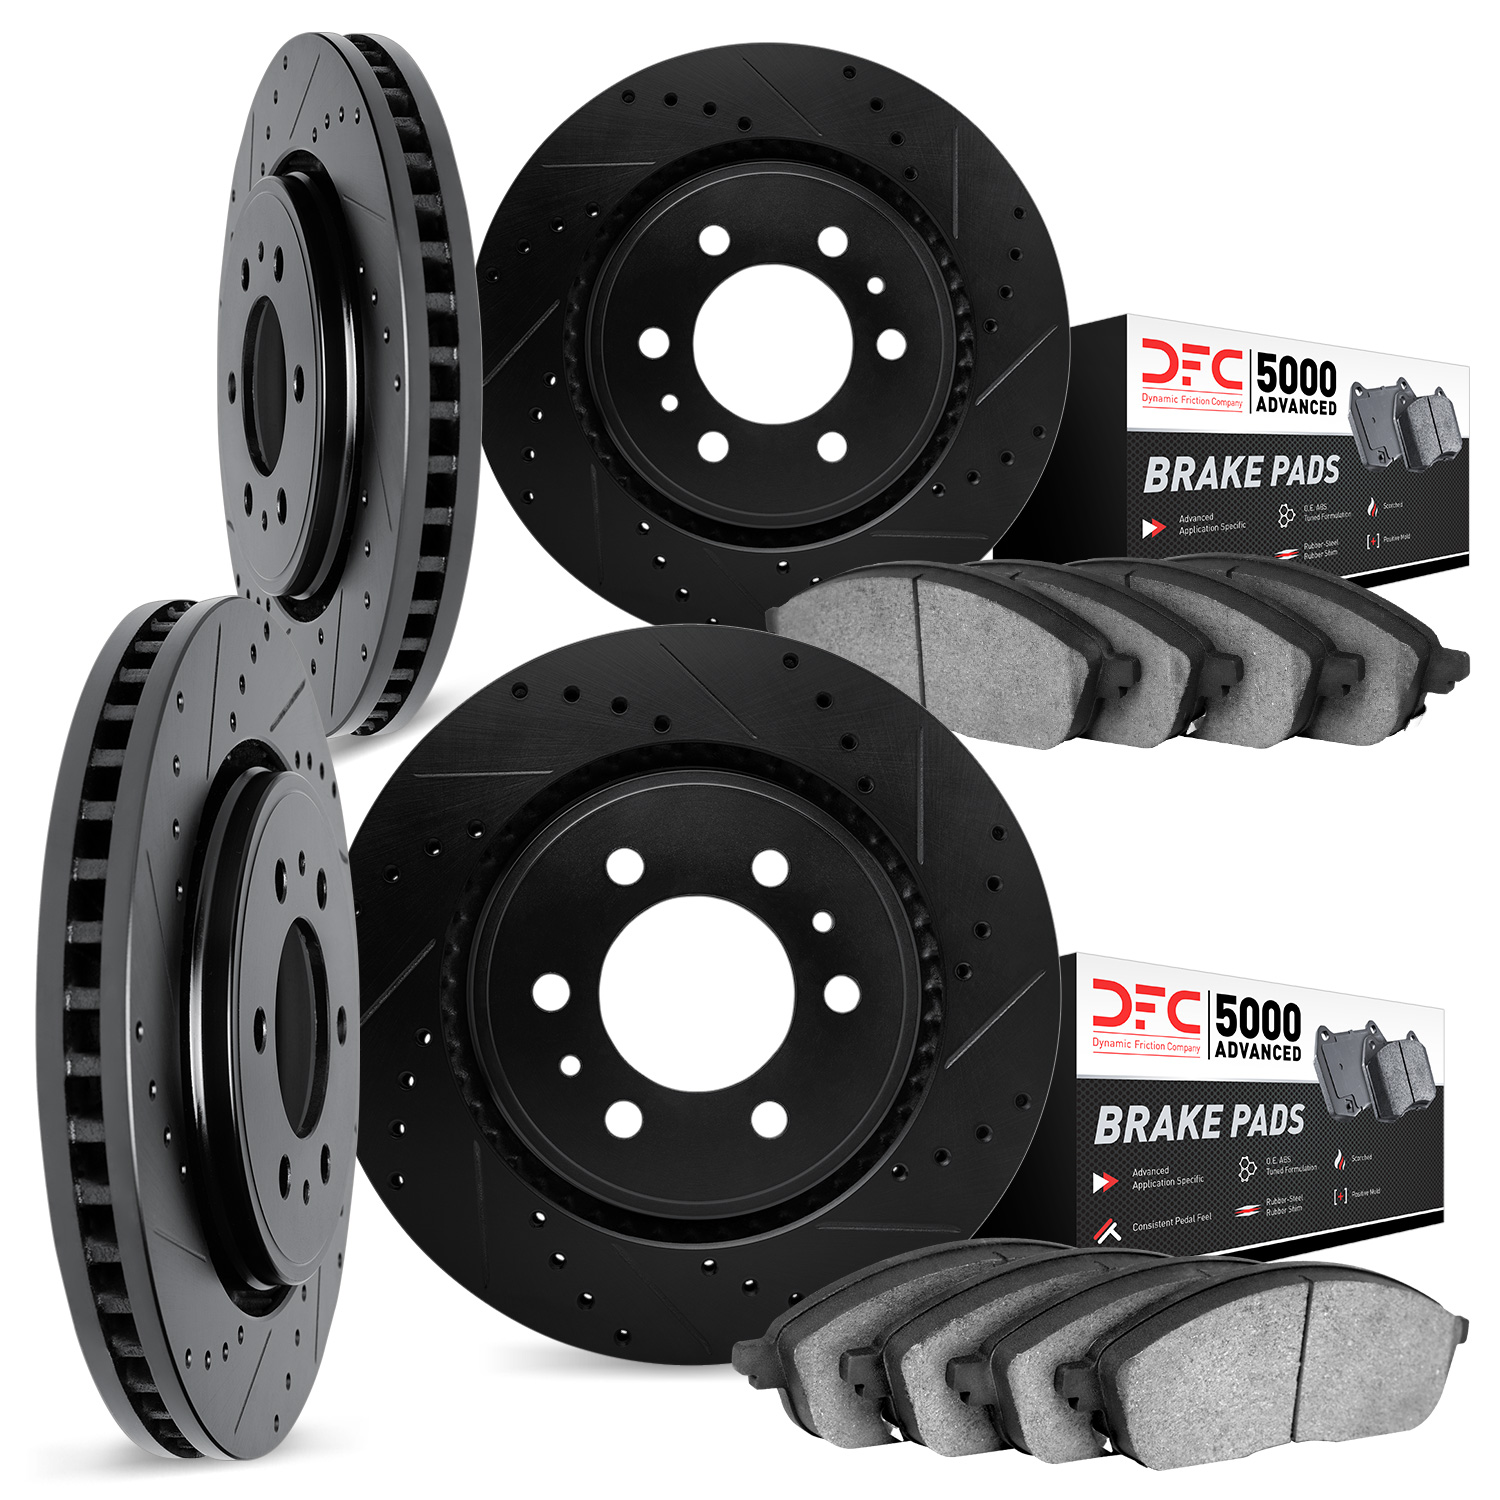 8504-48022 Drilled/Slotted Brake Rotors w/5000 Advanced Brake Pads Kit [Black], 2002-2008 GM, Position: Front and Rear